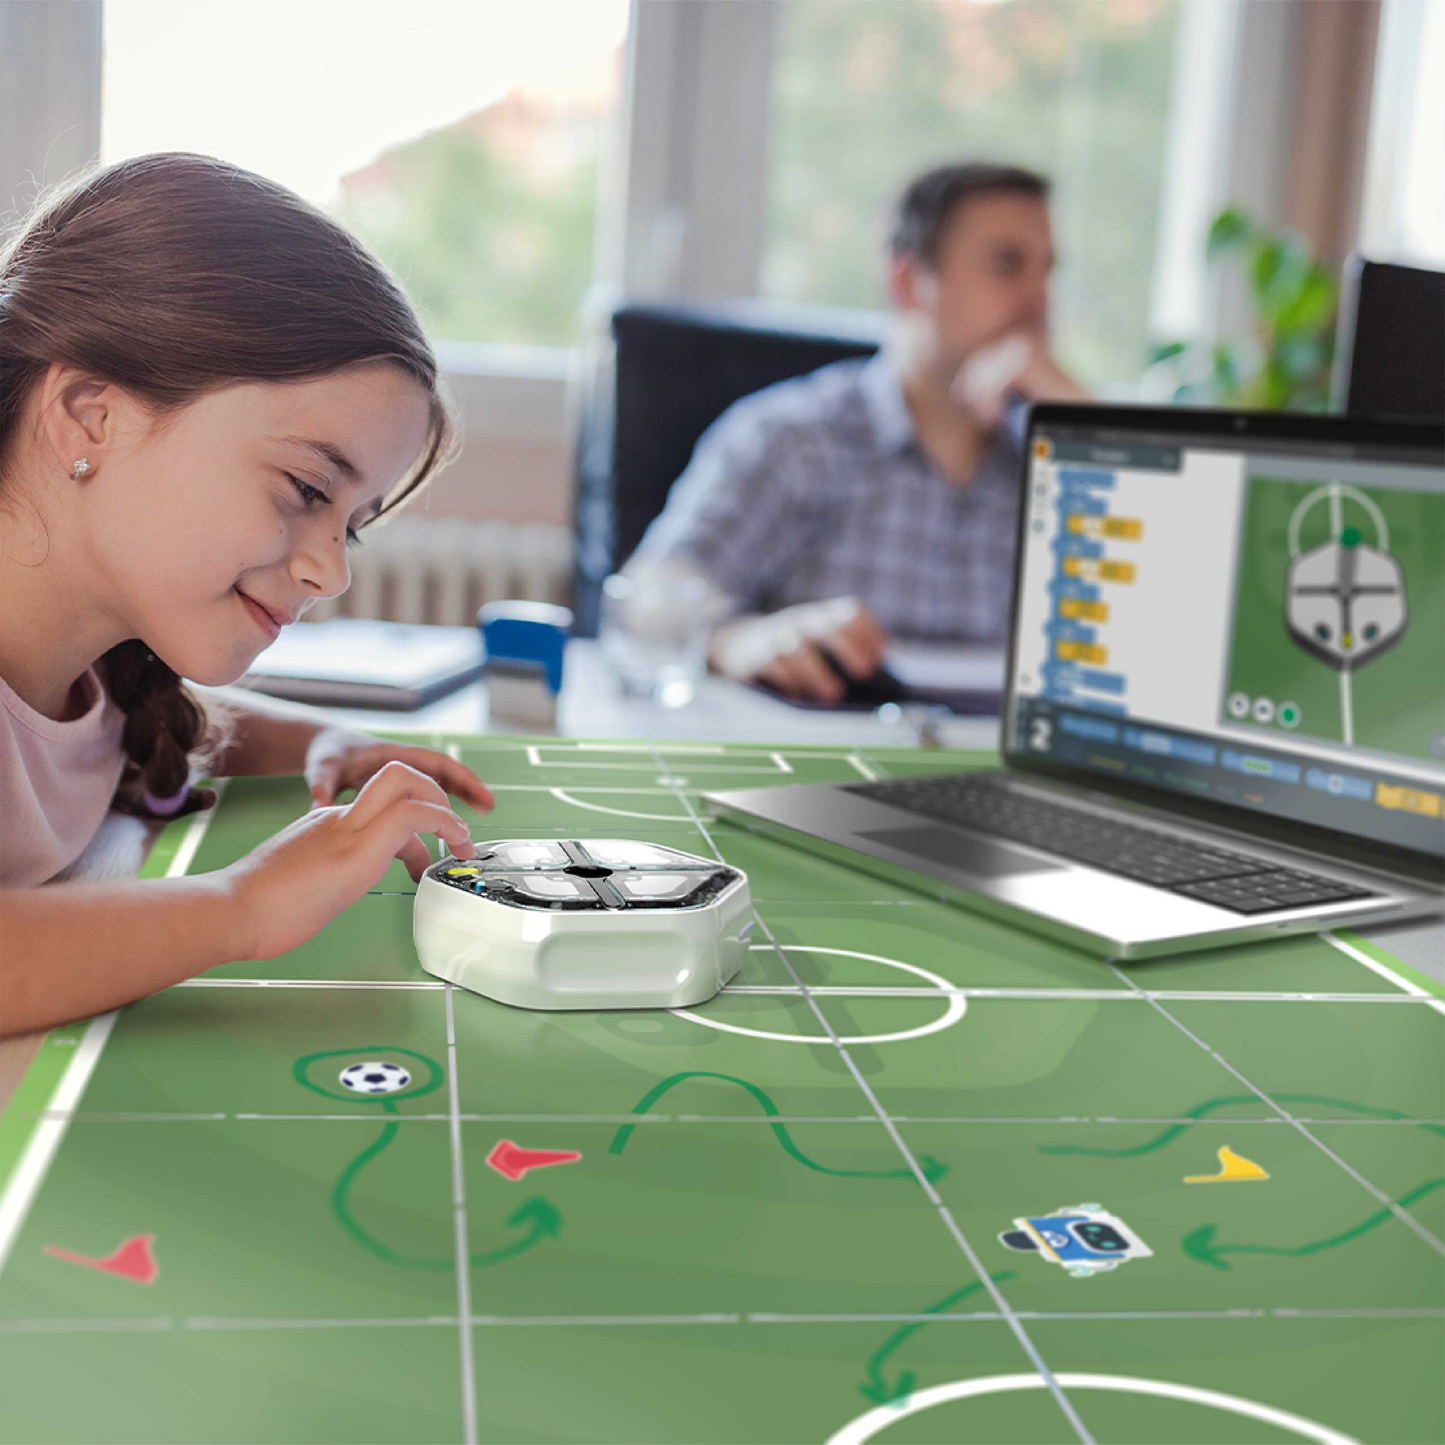 iRobot Root Adventure Packs: Coding with Sports - Soccer (Football)